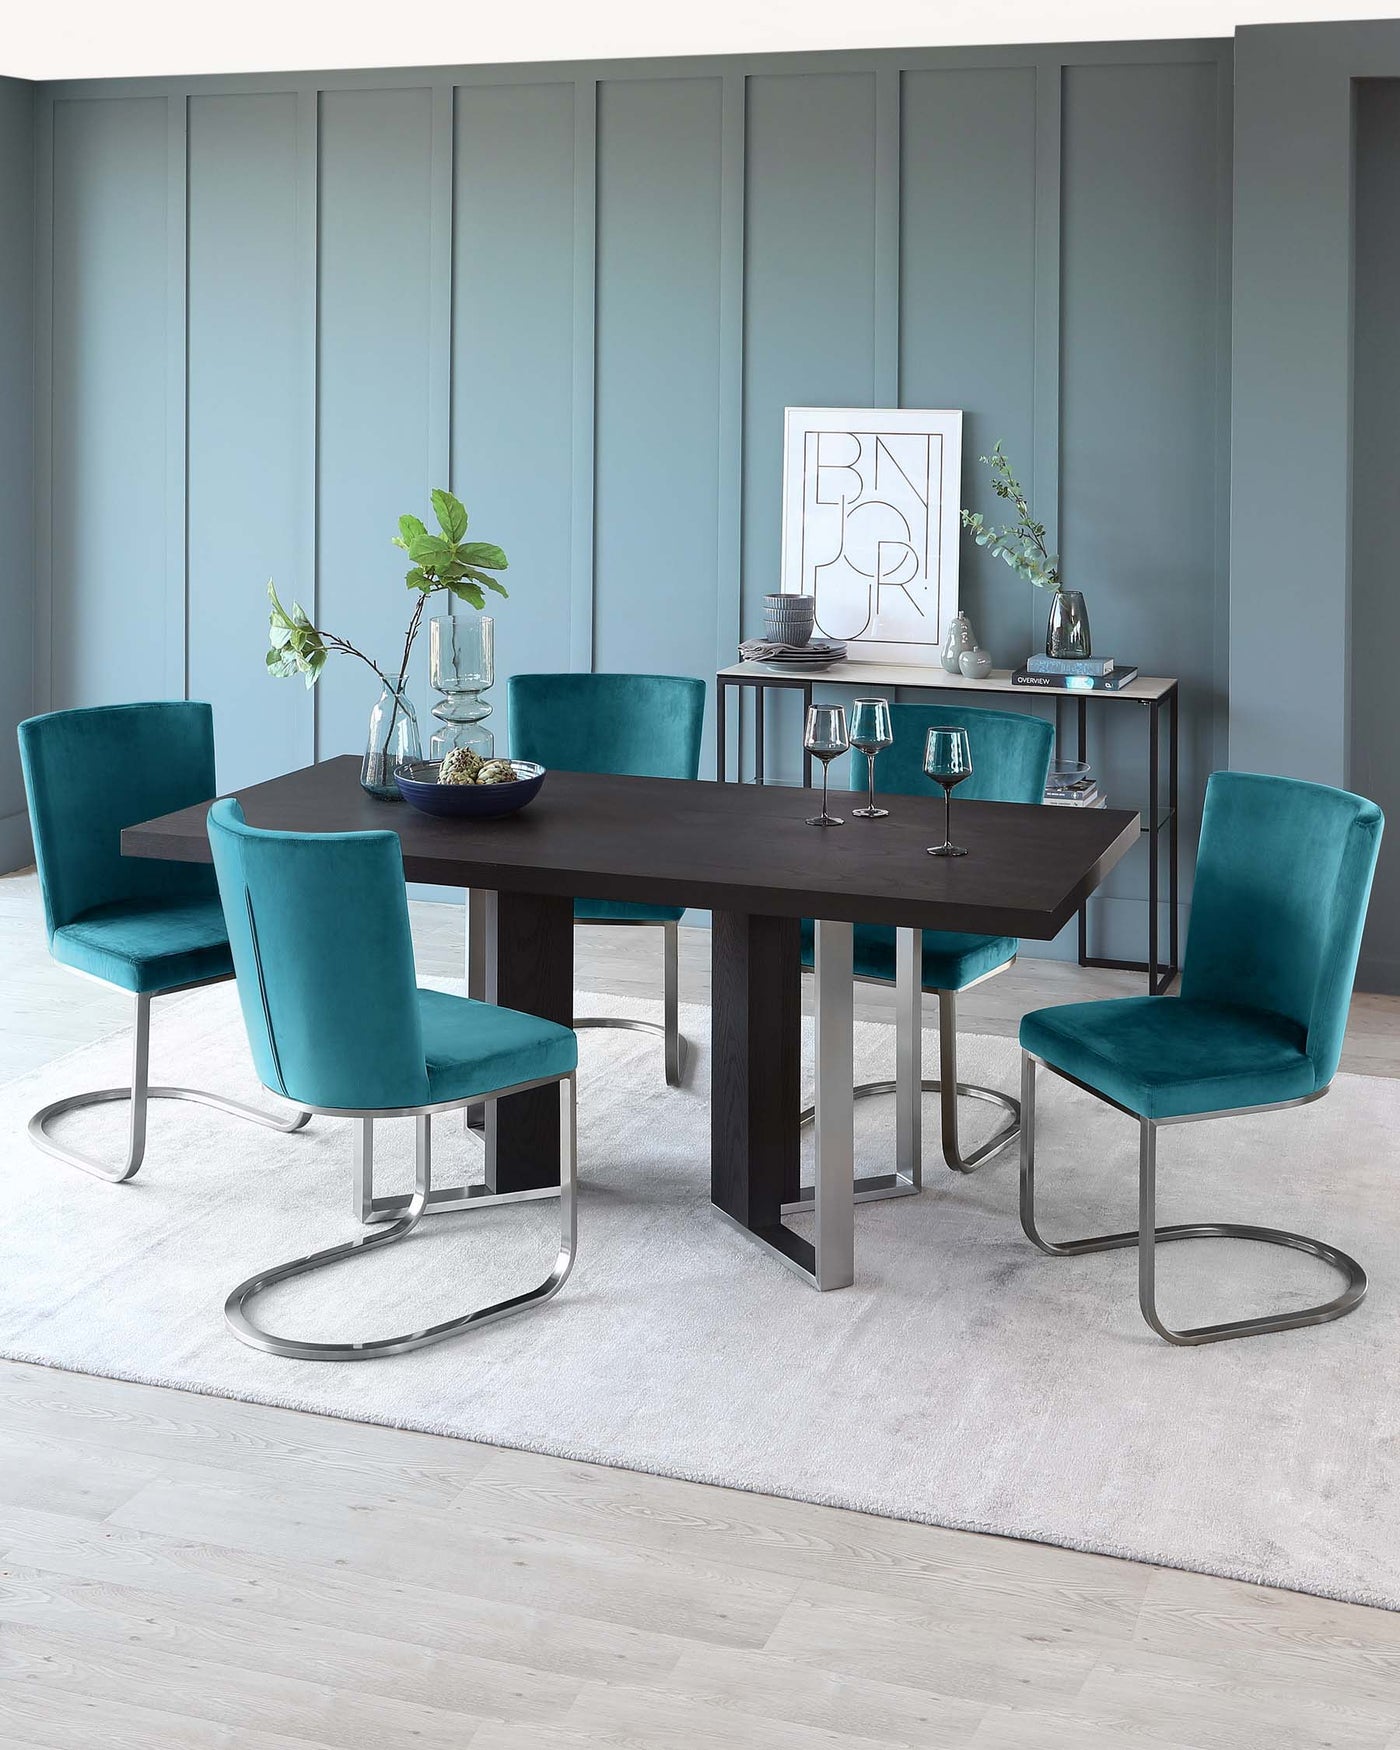 A modern dining set featuring a dark wood rectangular table with chunky legs paired with six teal velvet upholstered chairs with sleek curved metal bases. A matching dark wood console table with decor items and framed artwork is placed against a panelled wall in a muted blue hue. The setup is completed with a light grey area rug and hardwood flooring.